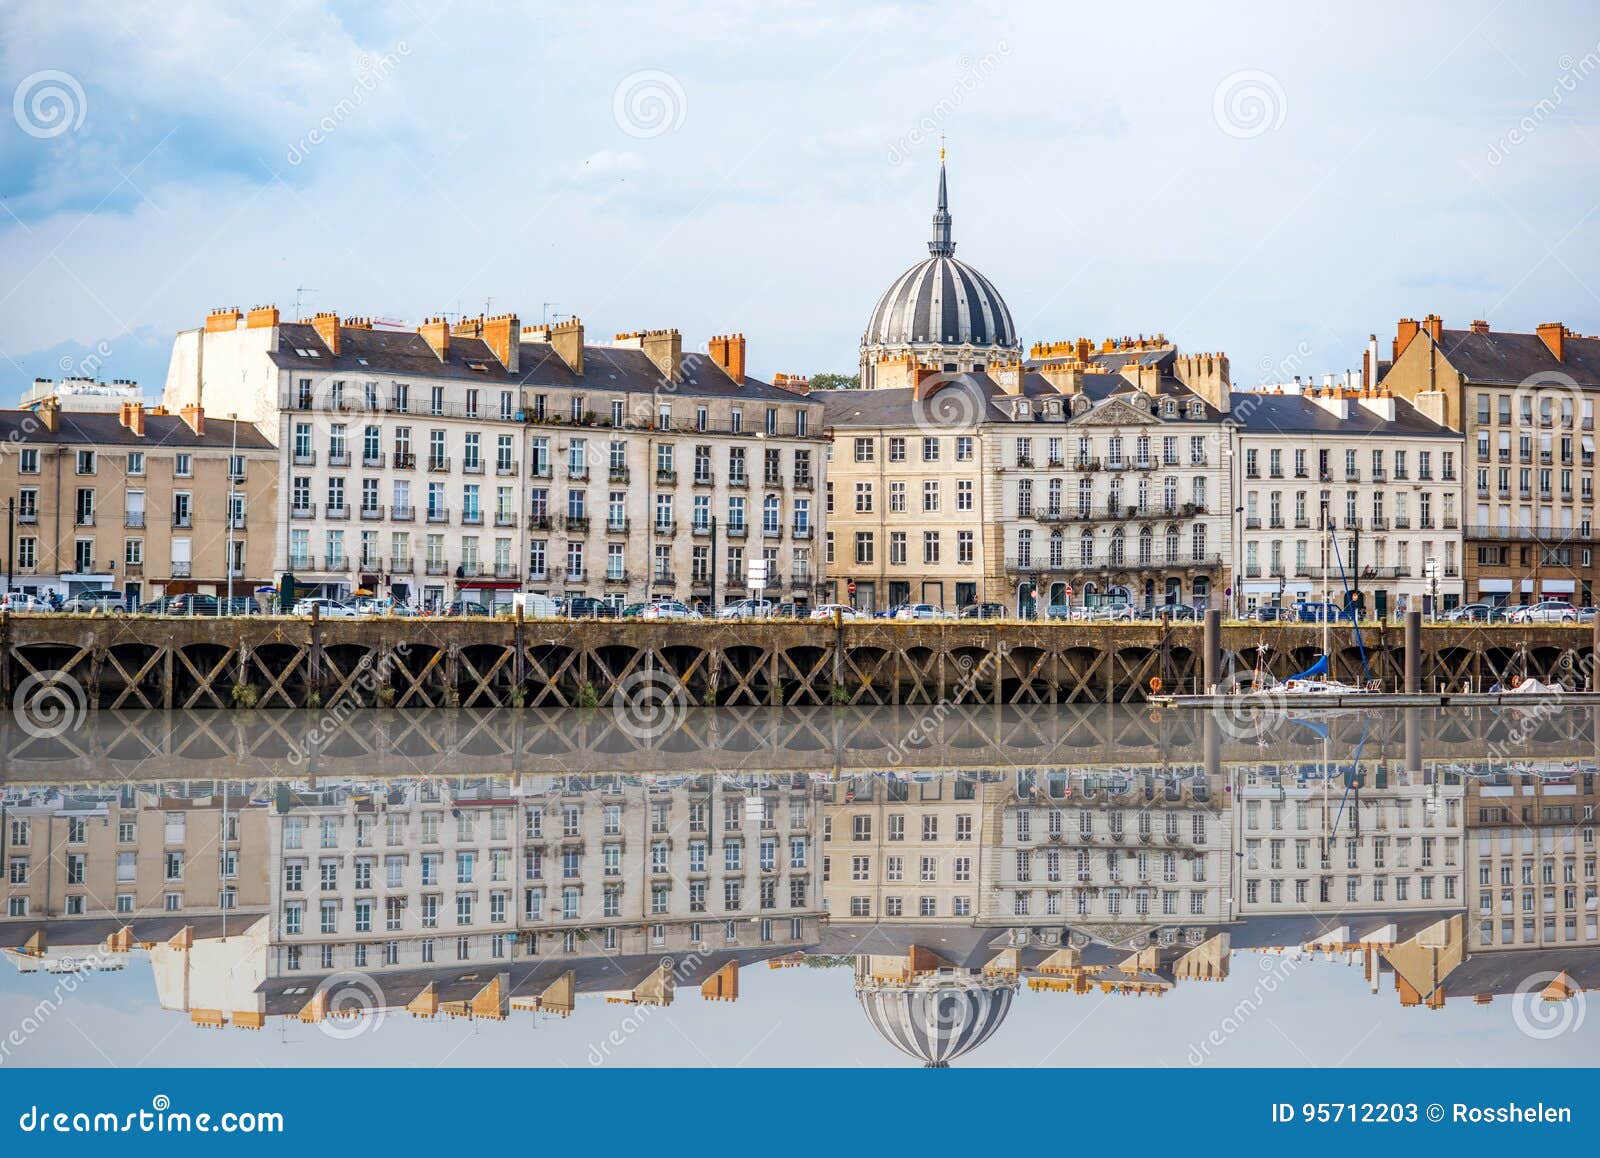 nantes city in france